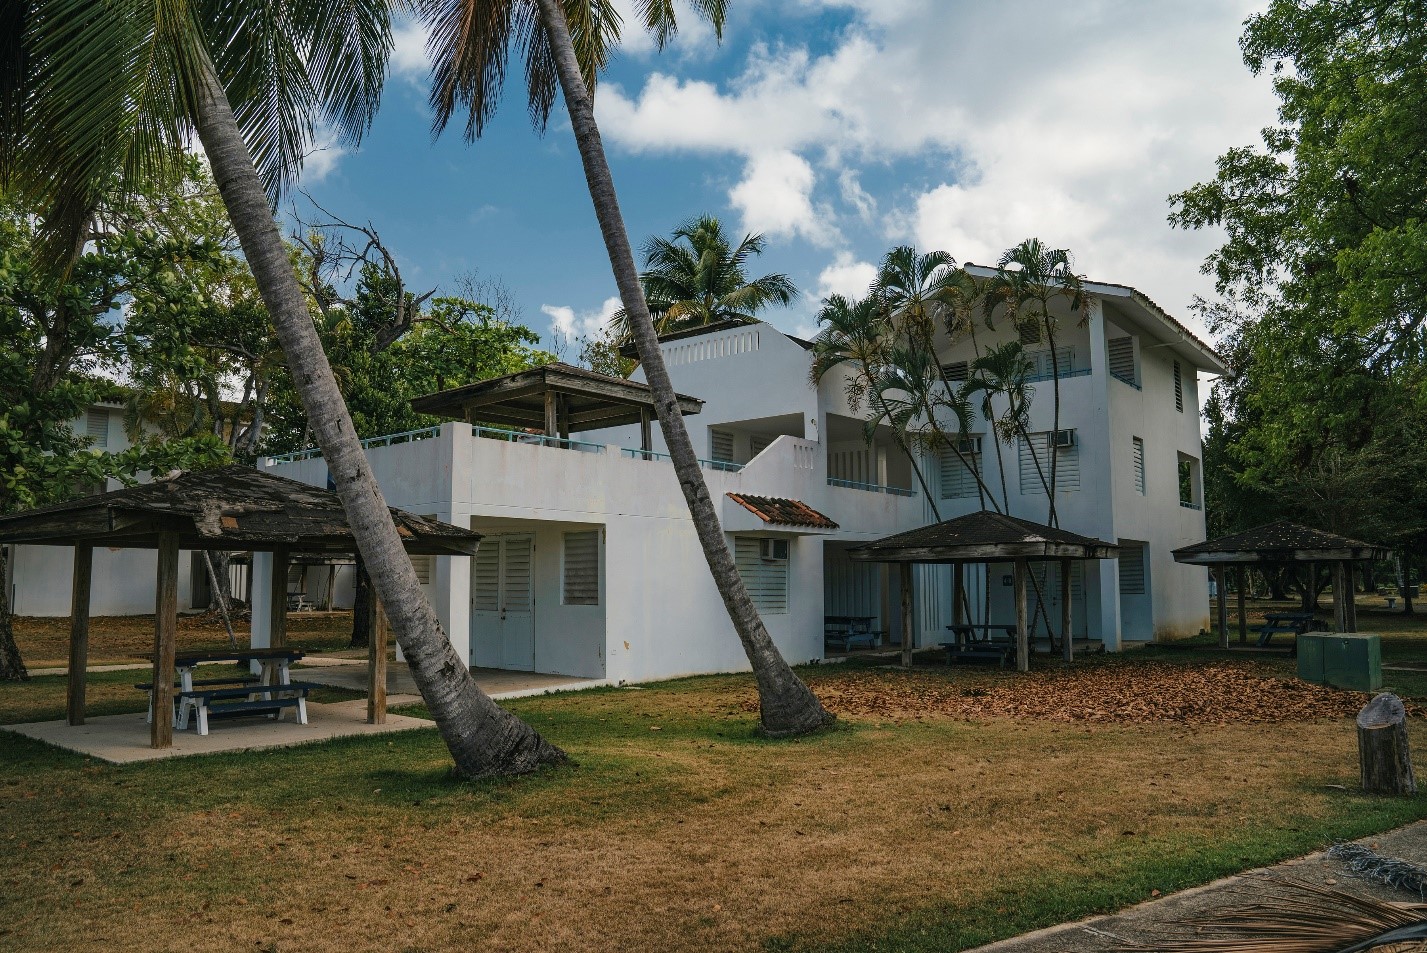 A white multiple floors building in the Punta Santiago Vacation Center.